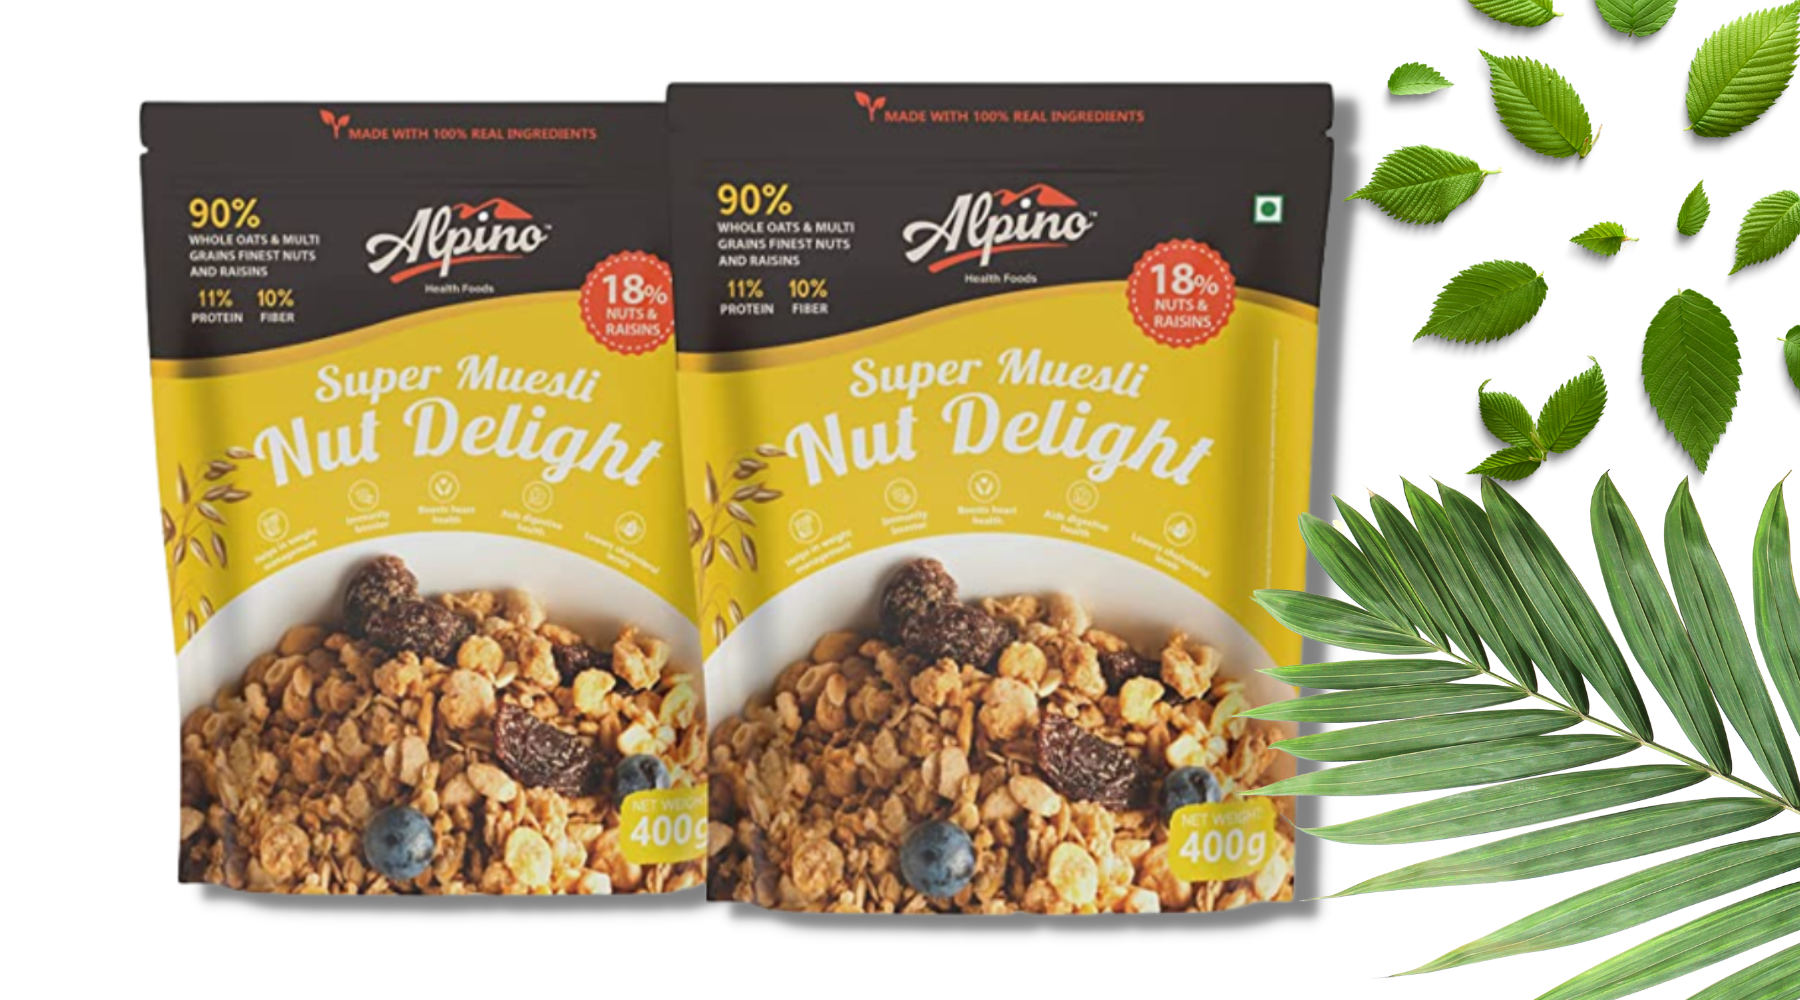 Alpino Super Muesli Fruit and Nuts: A Comprehensive Comparison with other Muesli Brands